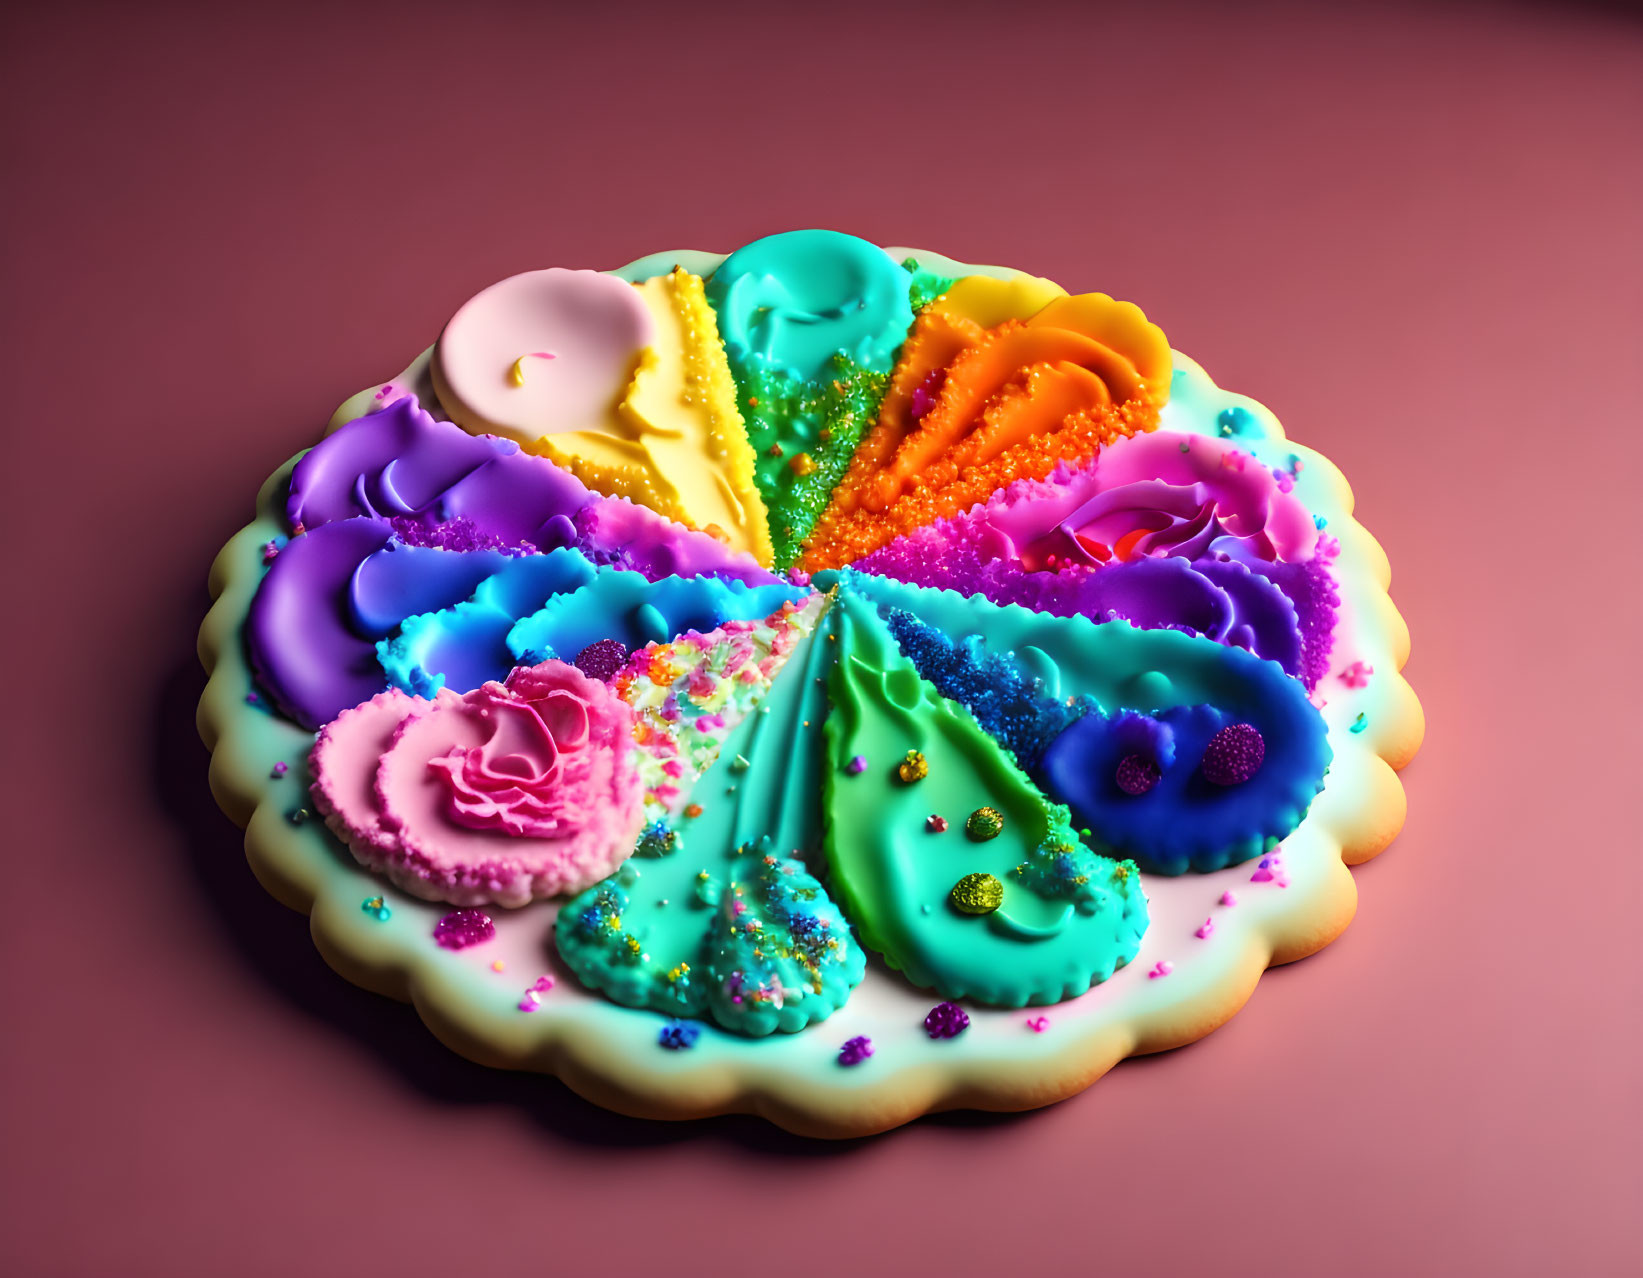 A Colorful and Diverse Super Cookie